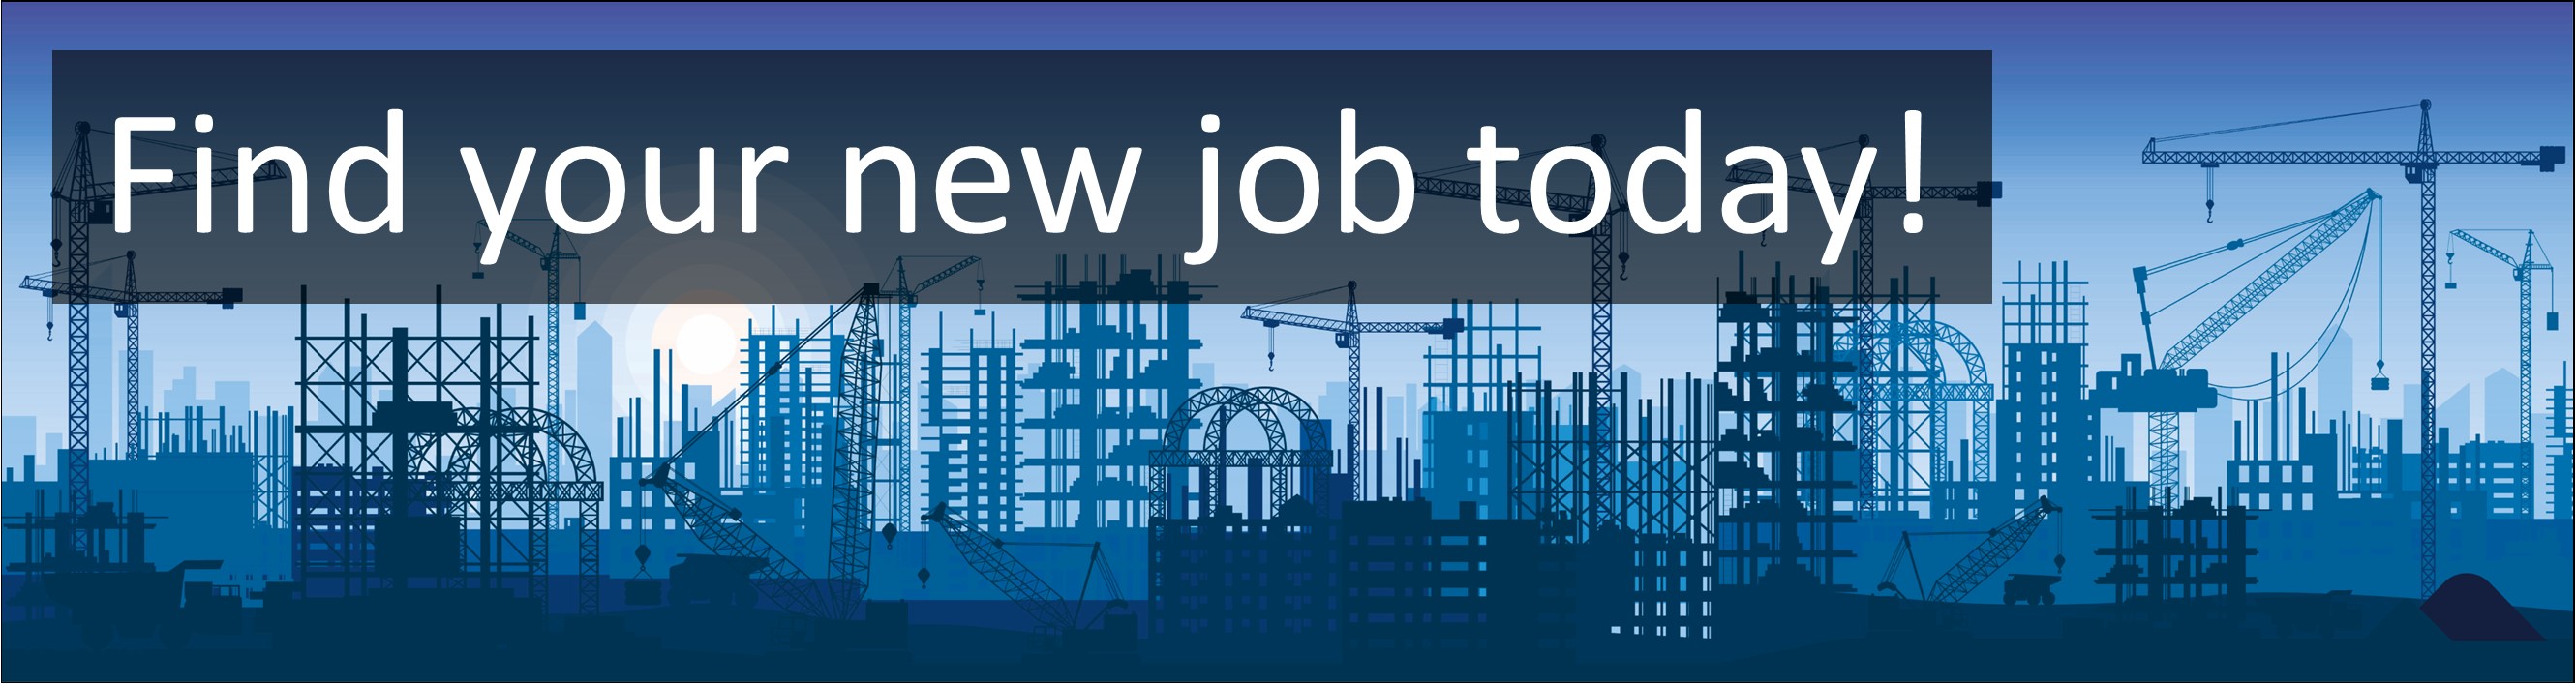 Construction & Trades Jobs. Quantity Surveyor M&E Jobs, Careers & Vacancies in Maidenhead, Berkshire Advertised by AWD online – Multi-Job Board Advertising and CV Sourcing Recruitment Services